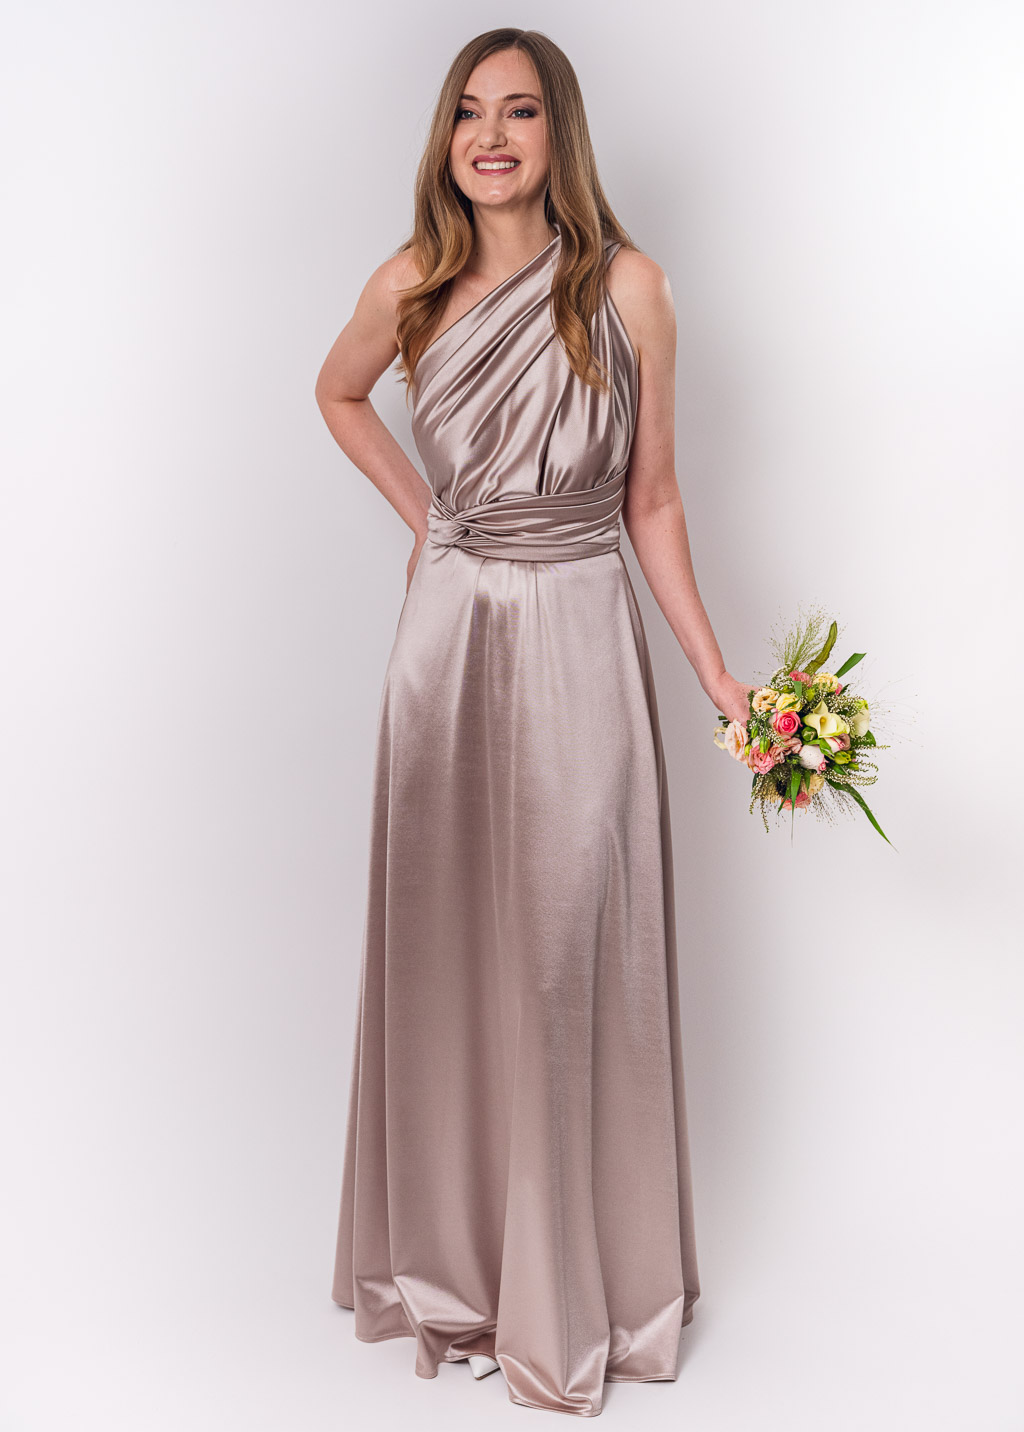 Champagne beige luxury satin infinity dress or jumpsuit